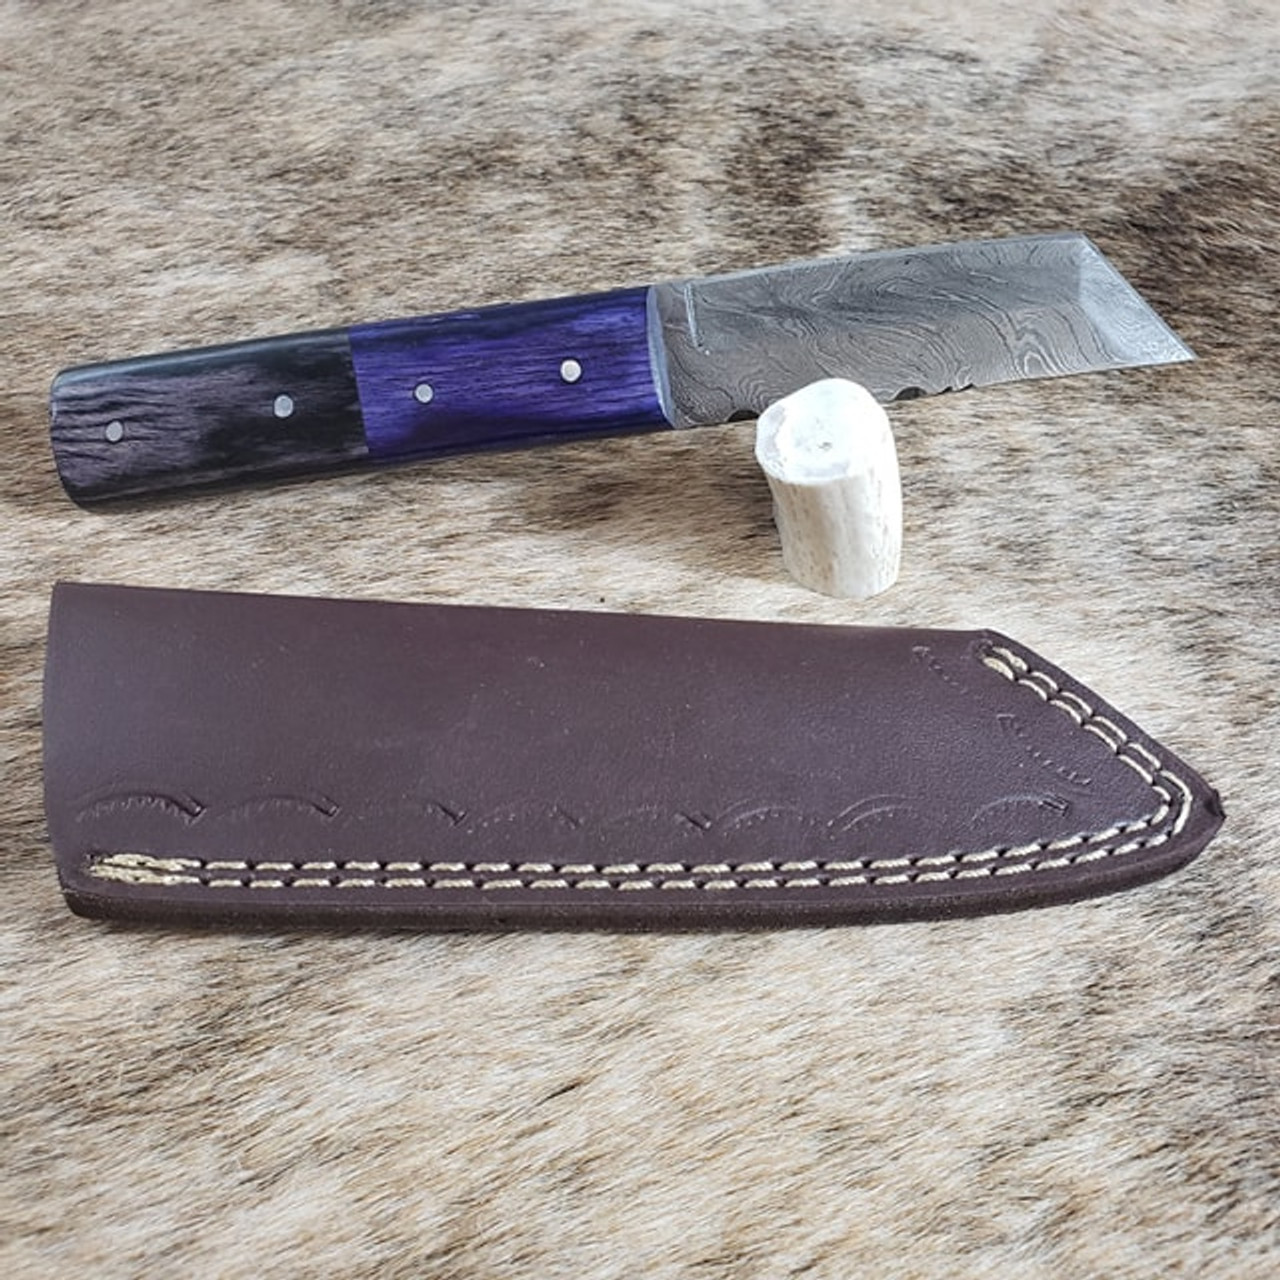 Hunter. Damascus Steel. Total length is 8.5 inches with 4 inch blade. Handle is Synthetic. Vertical sheath included. Straight edge with angled chisel point. Heavy construction.